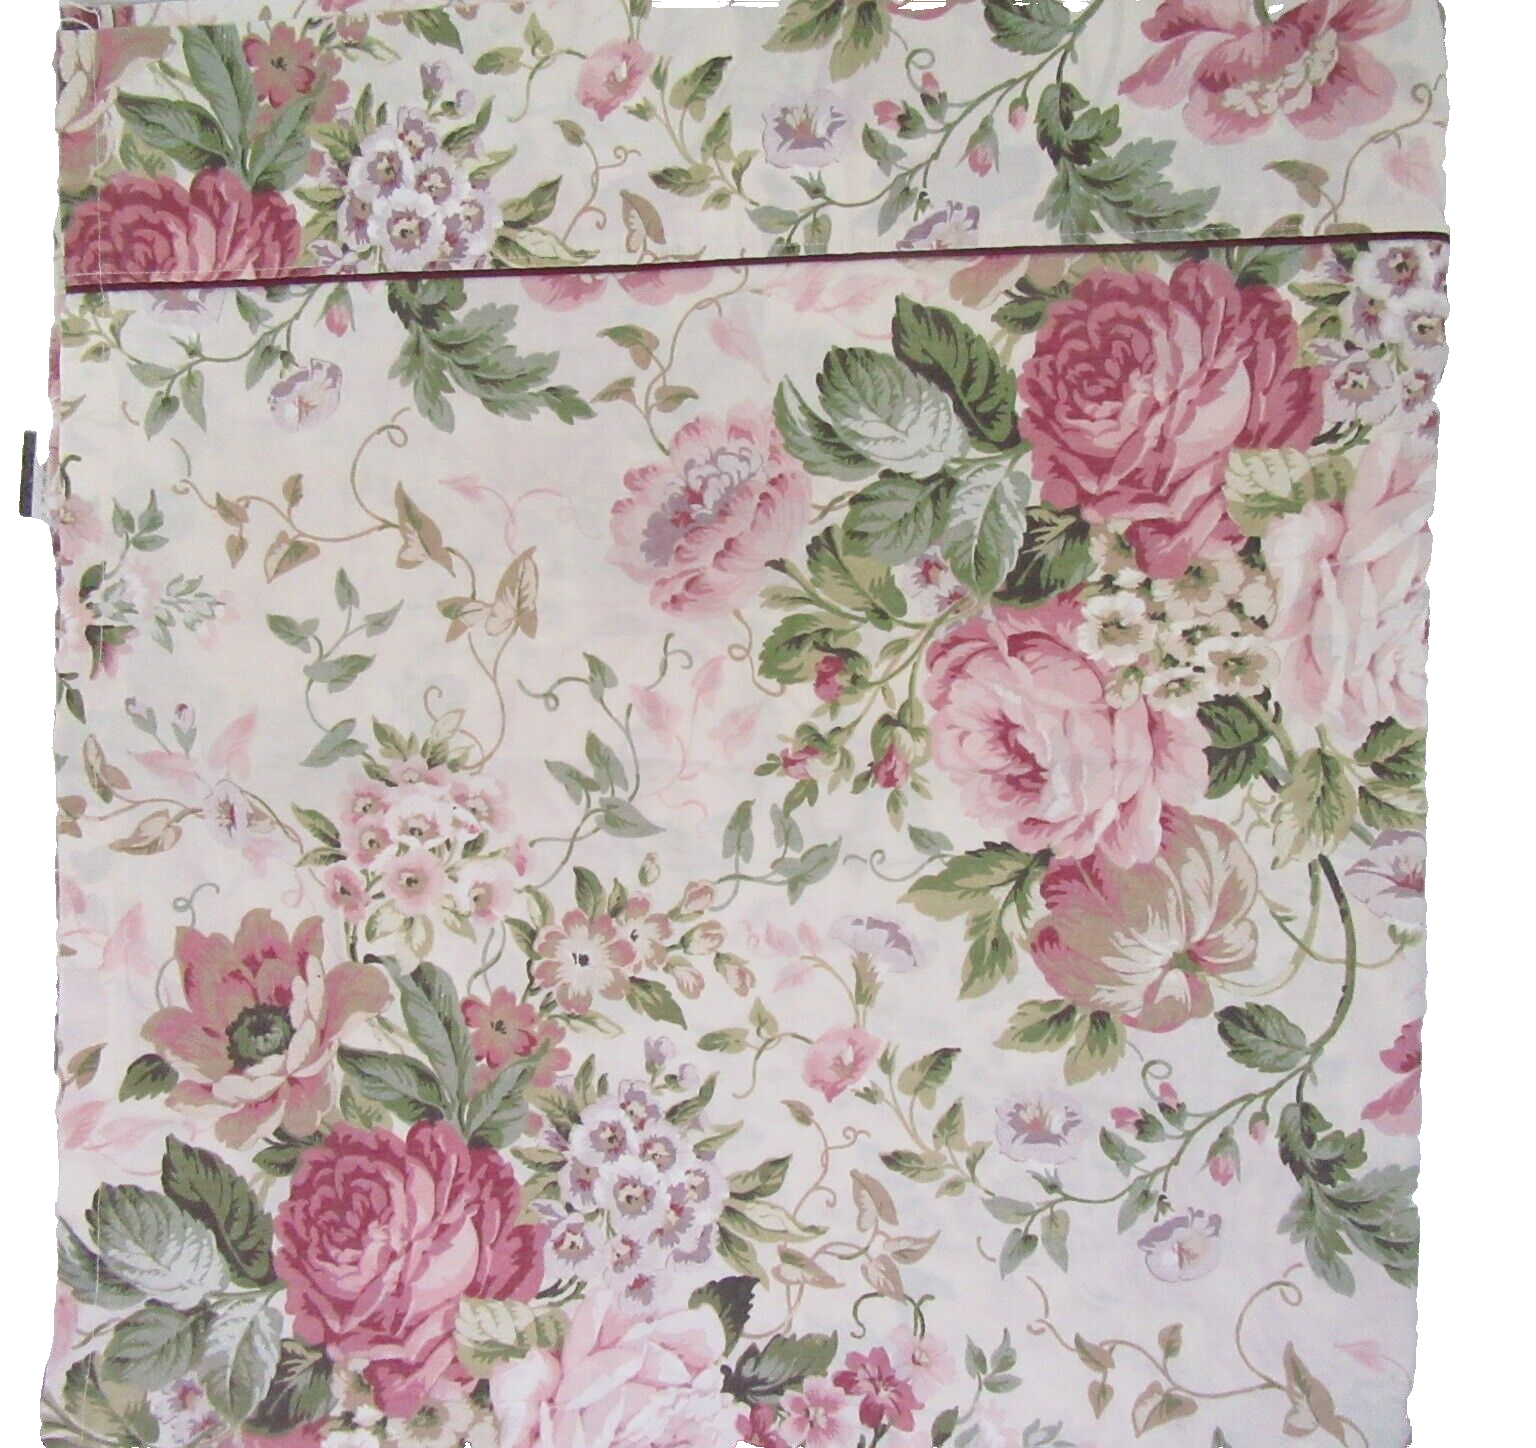 Crown Crafts Rose Floral Multi Full/Double Flat Sheet - $30.00